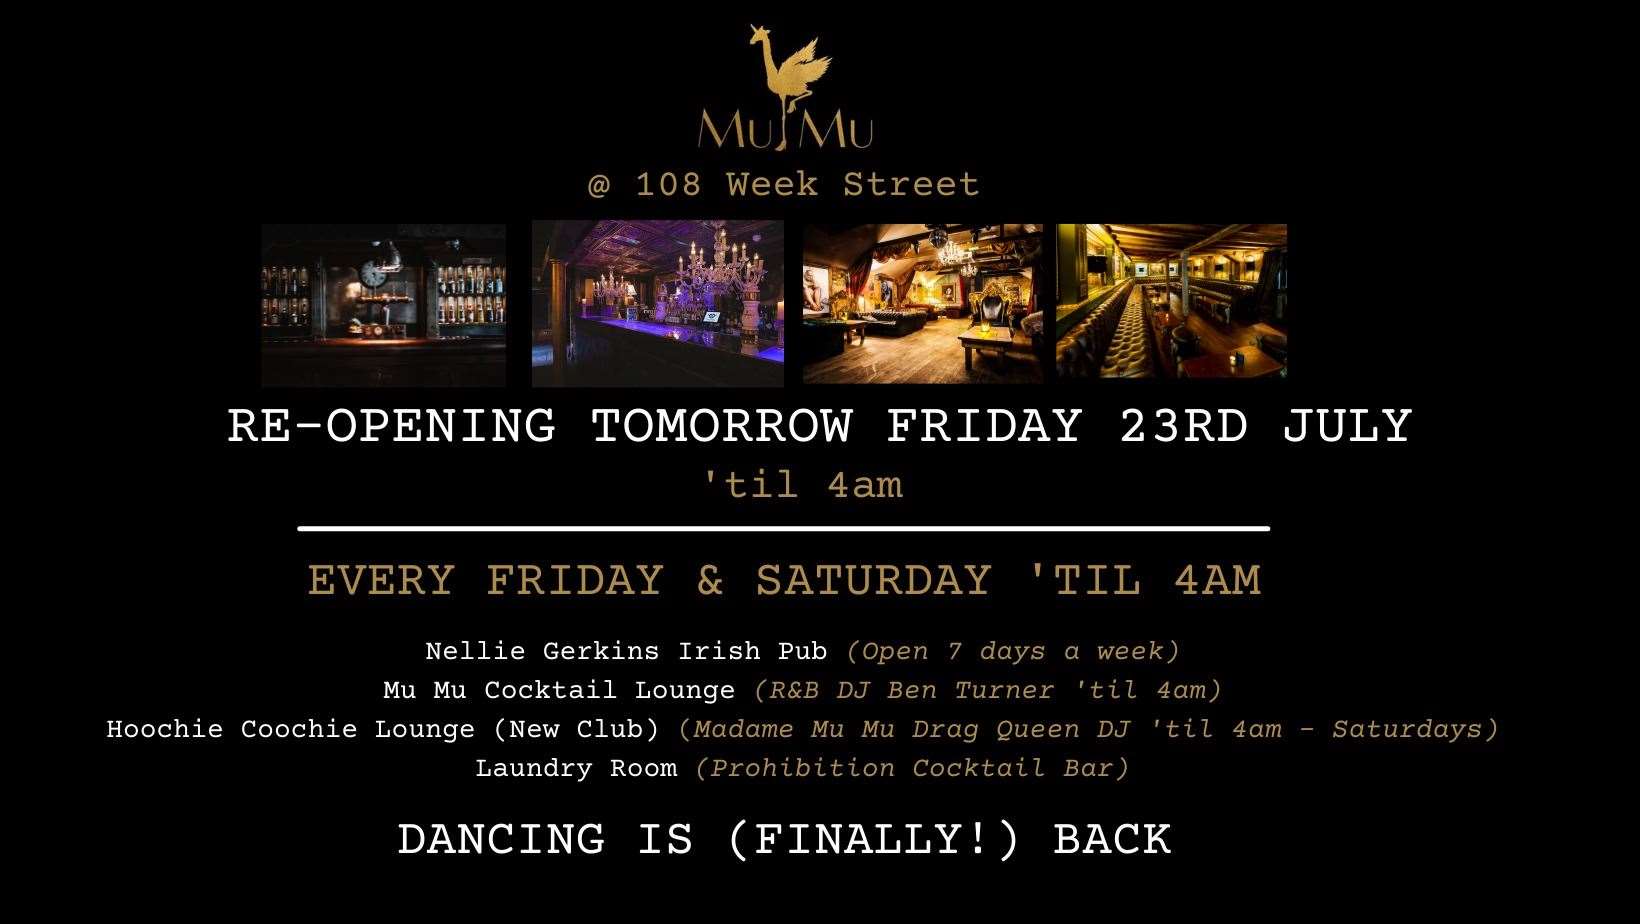 Maidstone nightclub Mu Mu is reopening Friday after a race against time following a devastating fire